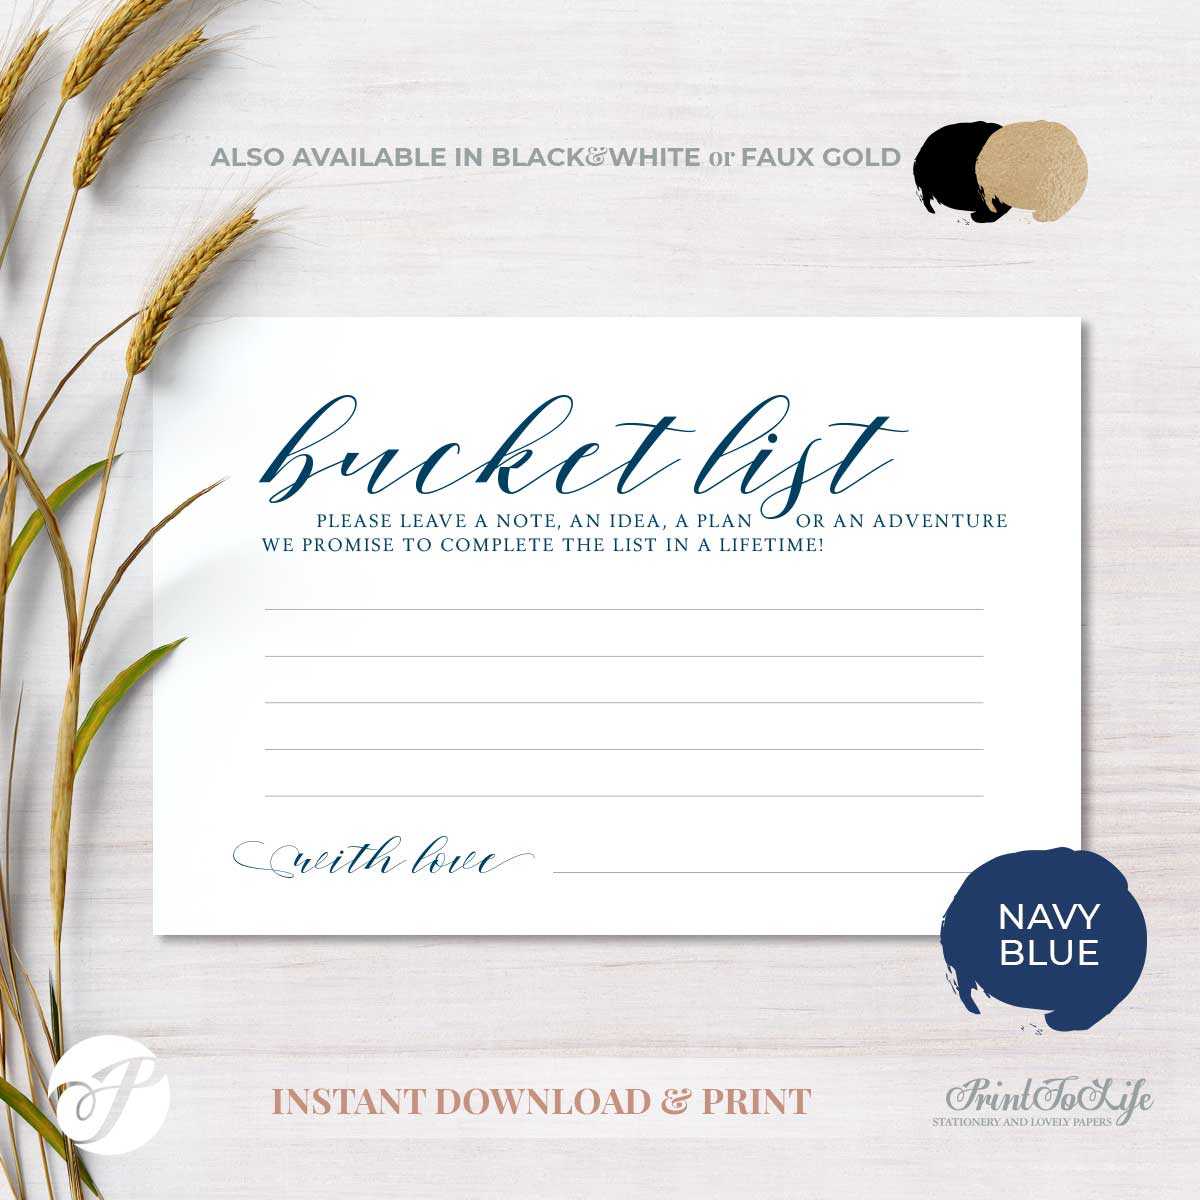 Bucket List Card, Wedding Advice Card, Navy Blue, #mrandmrs Collection Throughout Marriage Advice Cards Templates